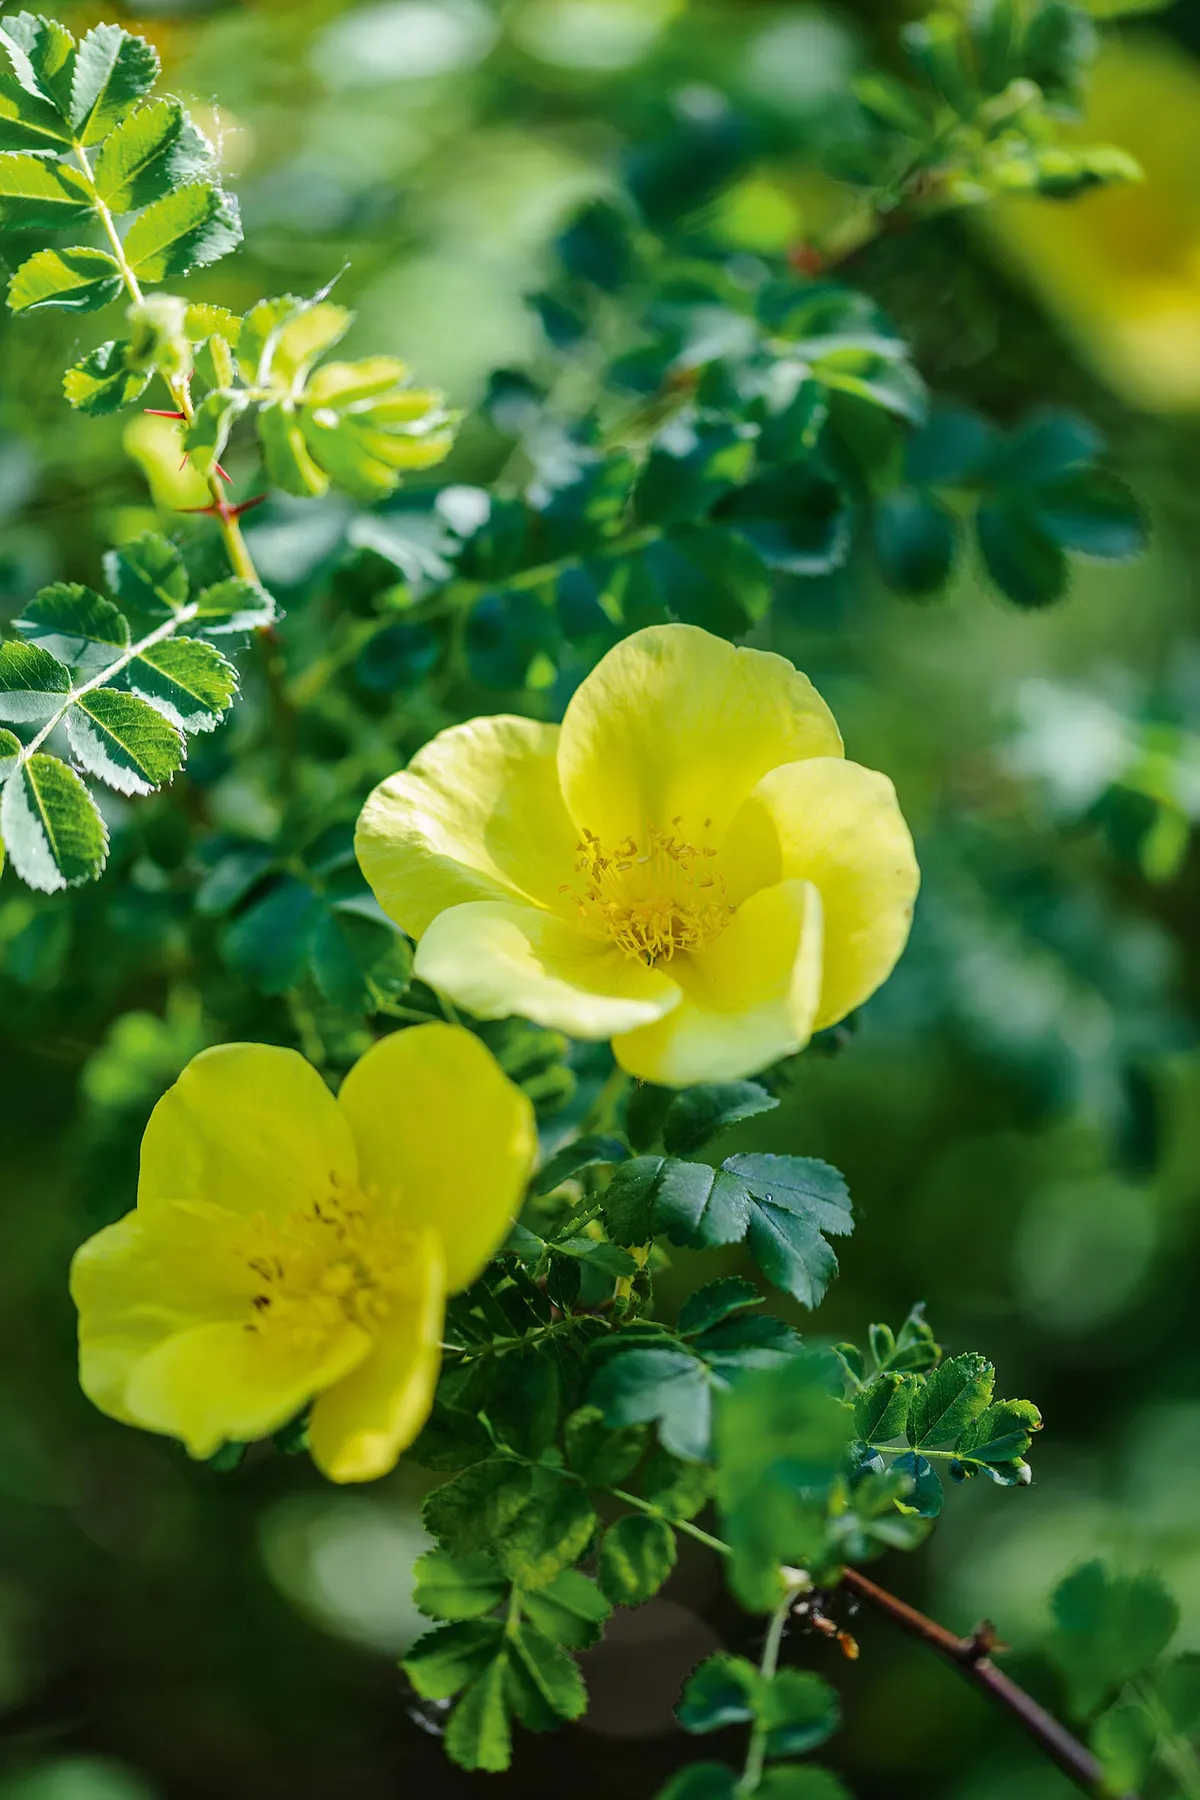 Rosa ‘Helen Knight’. This pretty and vigorous R. ecae hybrid rose makes a substantial, prickly shrub with delicate, pinnate foliage. The gleaming, shyly scented, canary-yellow blooms are held in small clusters and are produced along with the new apple-green foliage. 2.5m. RHS H6.